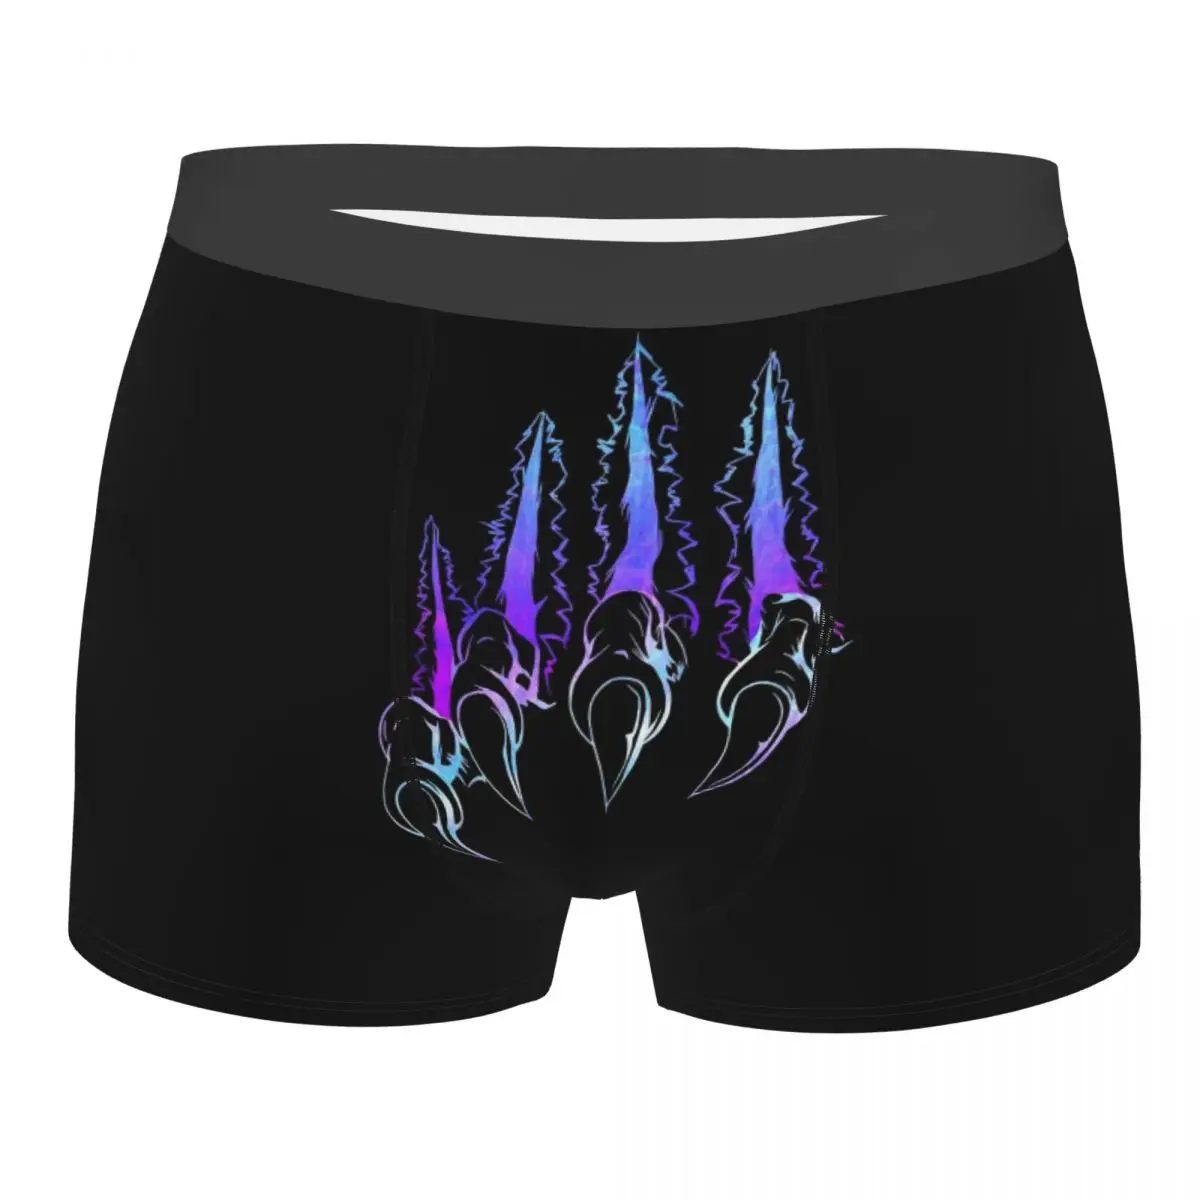 

Monster Face Men's Boxer Briefs,Highly Breathable Underwear,High Quality 3D Print Shorts Gift Idea